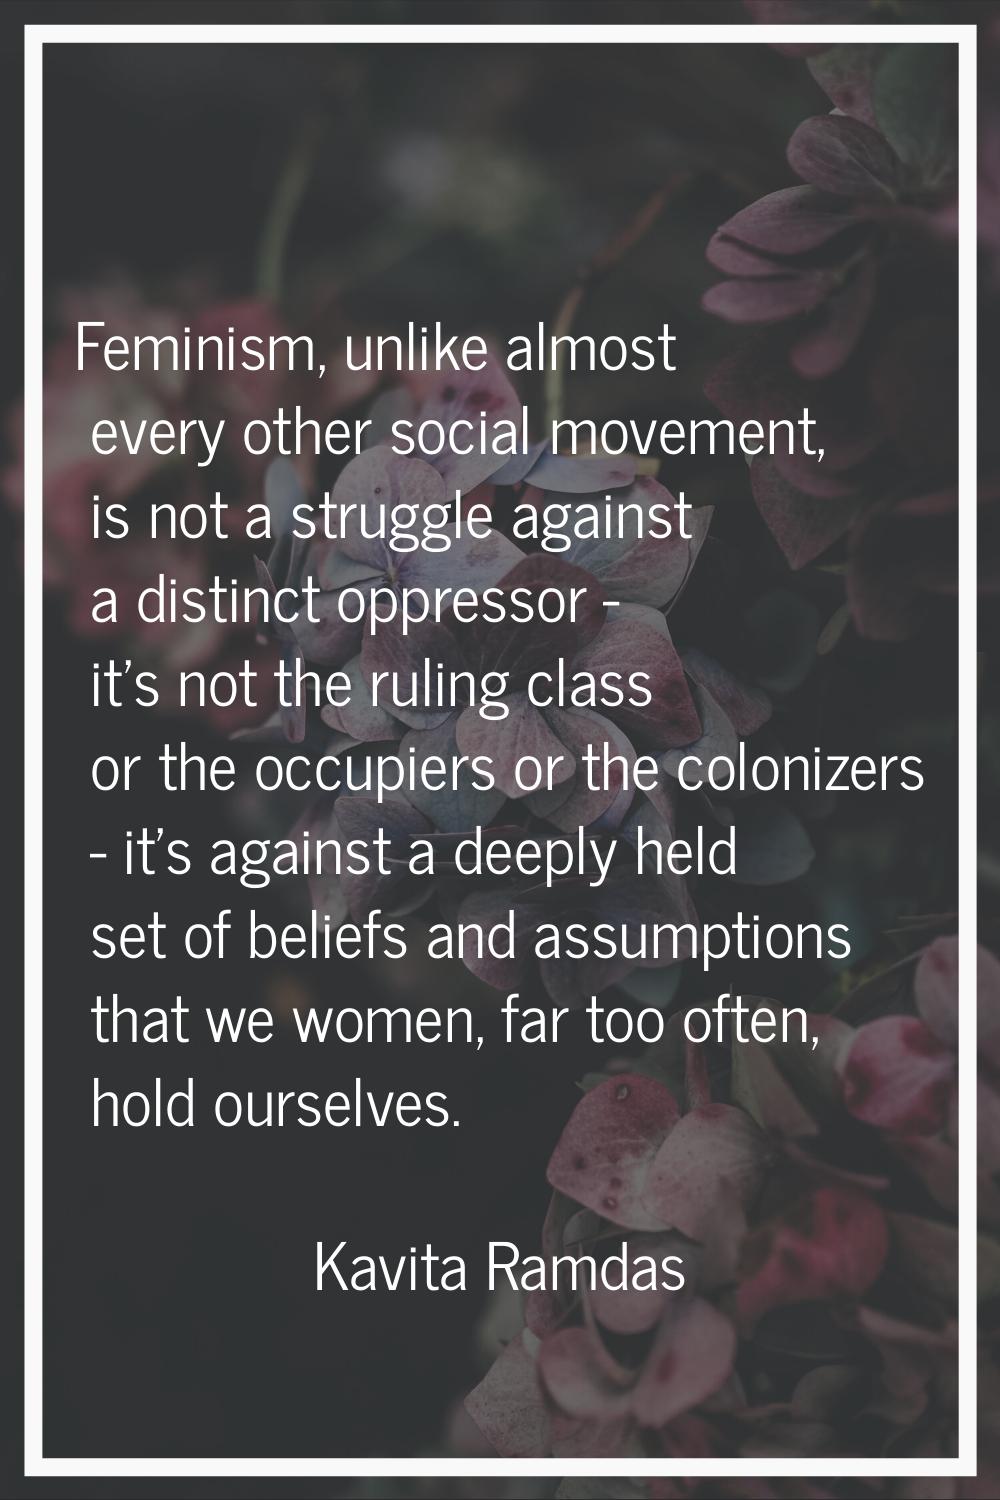 Feminism, unlike almost every other social movement, is not a struggle against a distinct oppressor